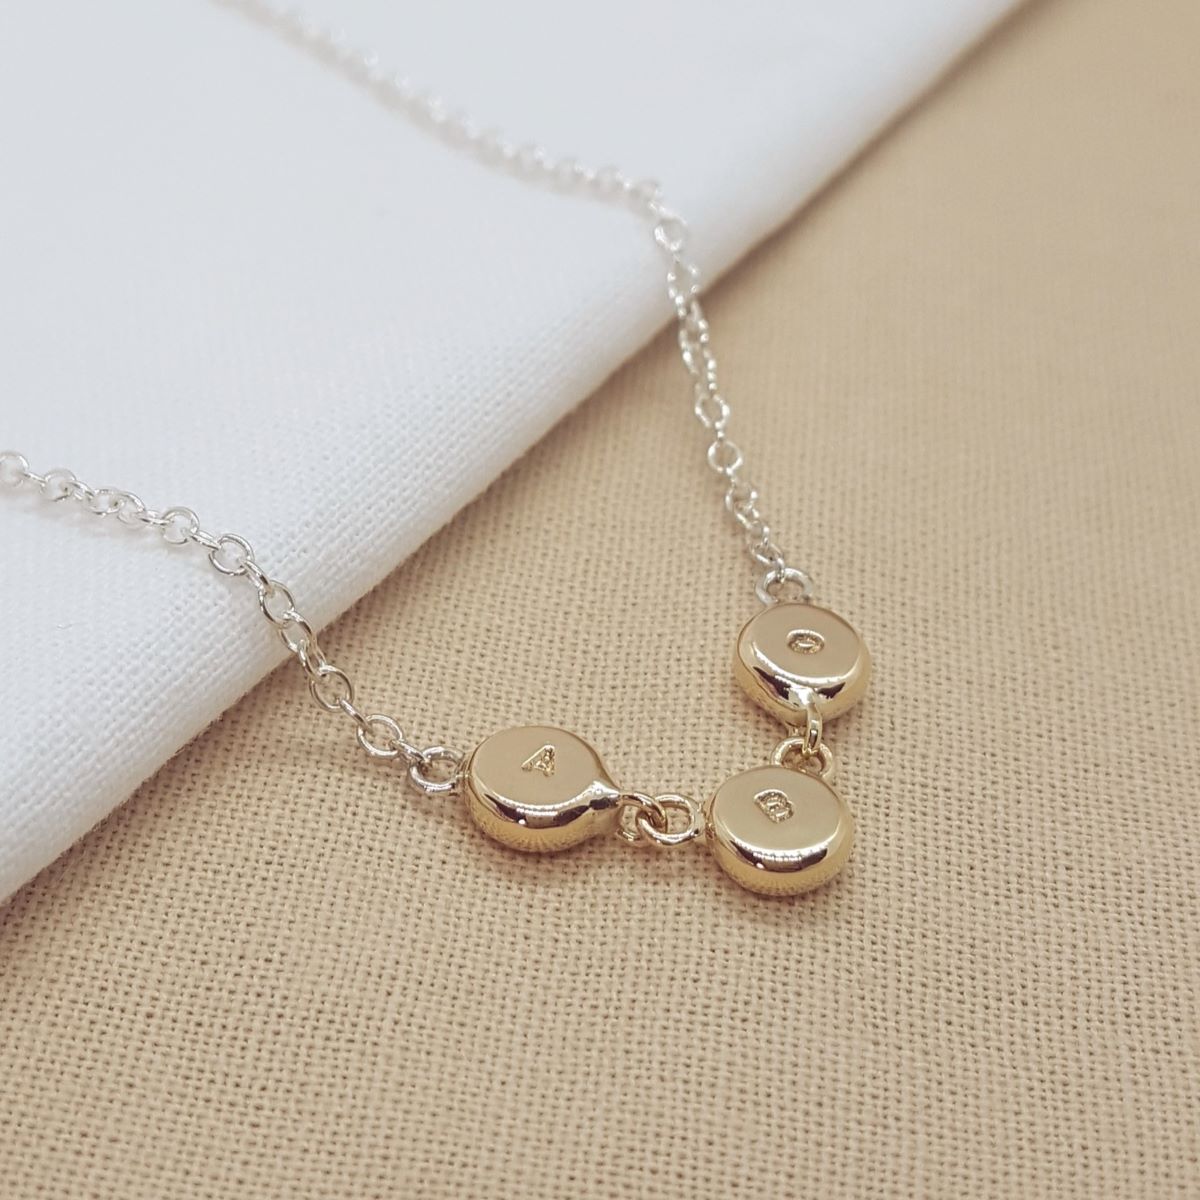 three 9ct yellow gold discs hand stamped with initials and connected with jump rings, hanging on a silver trace chain